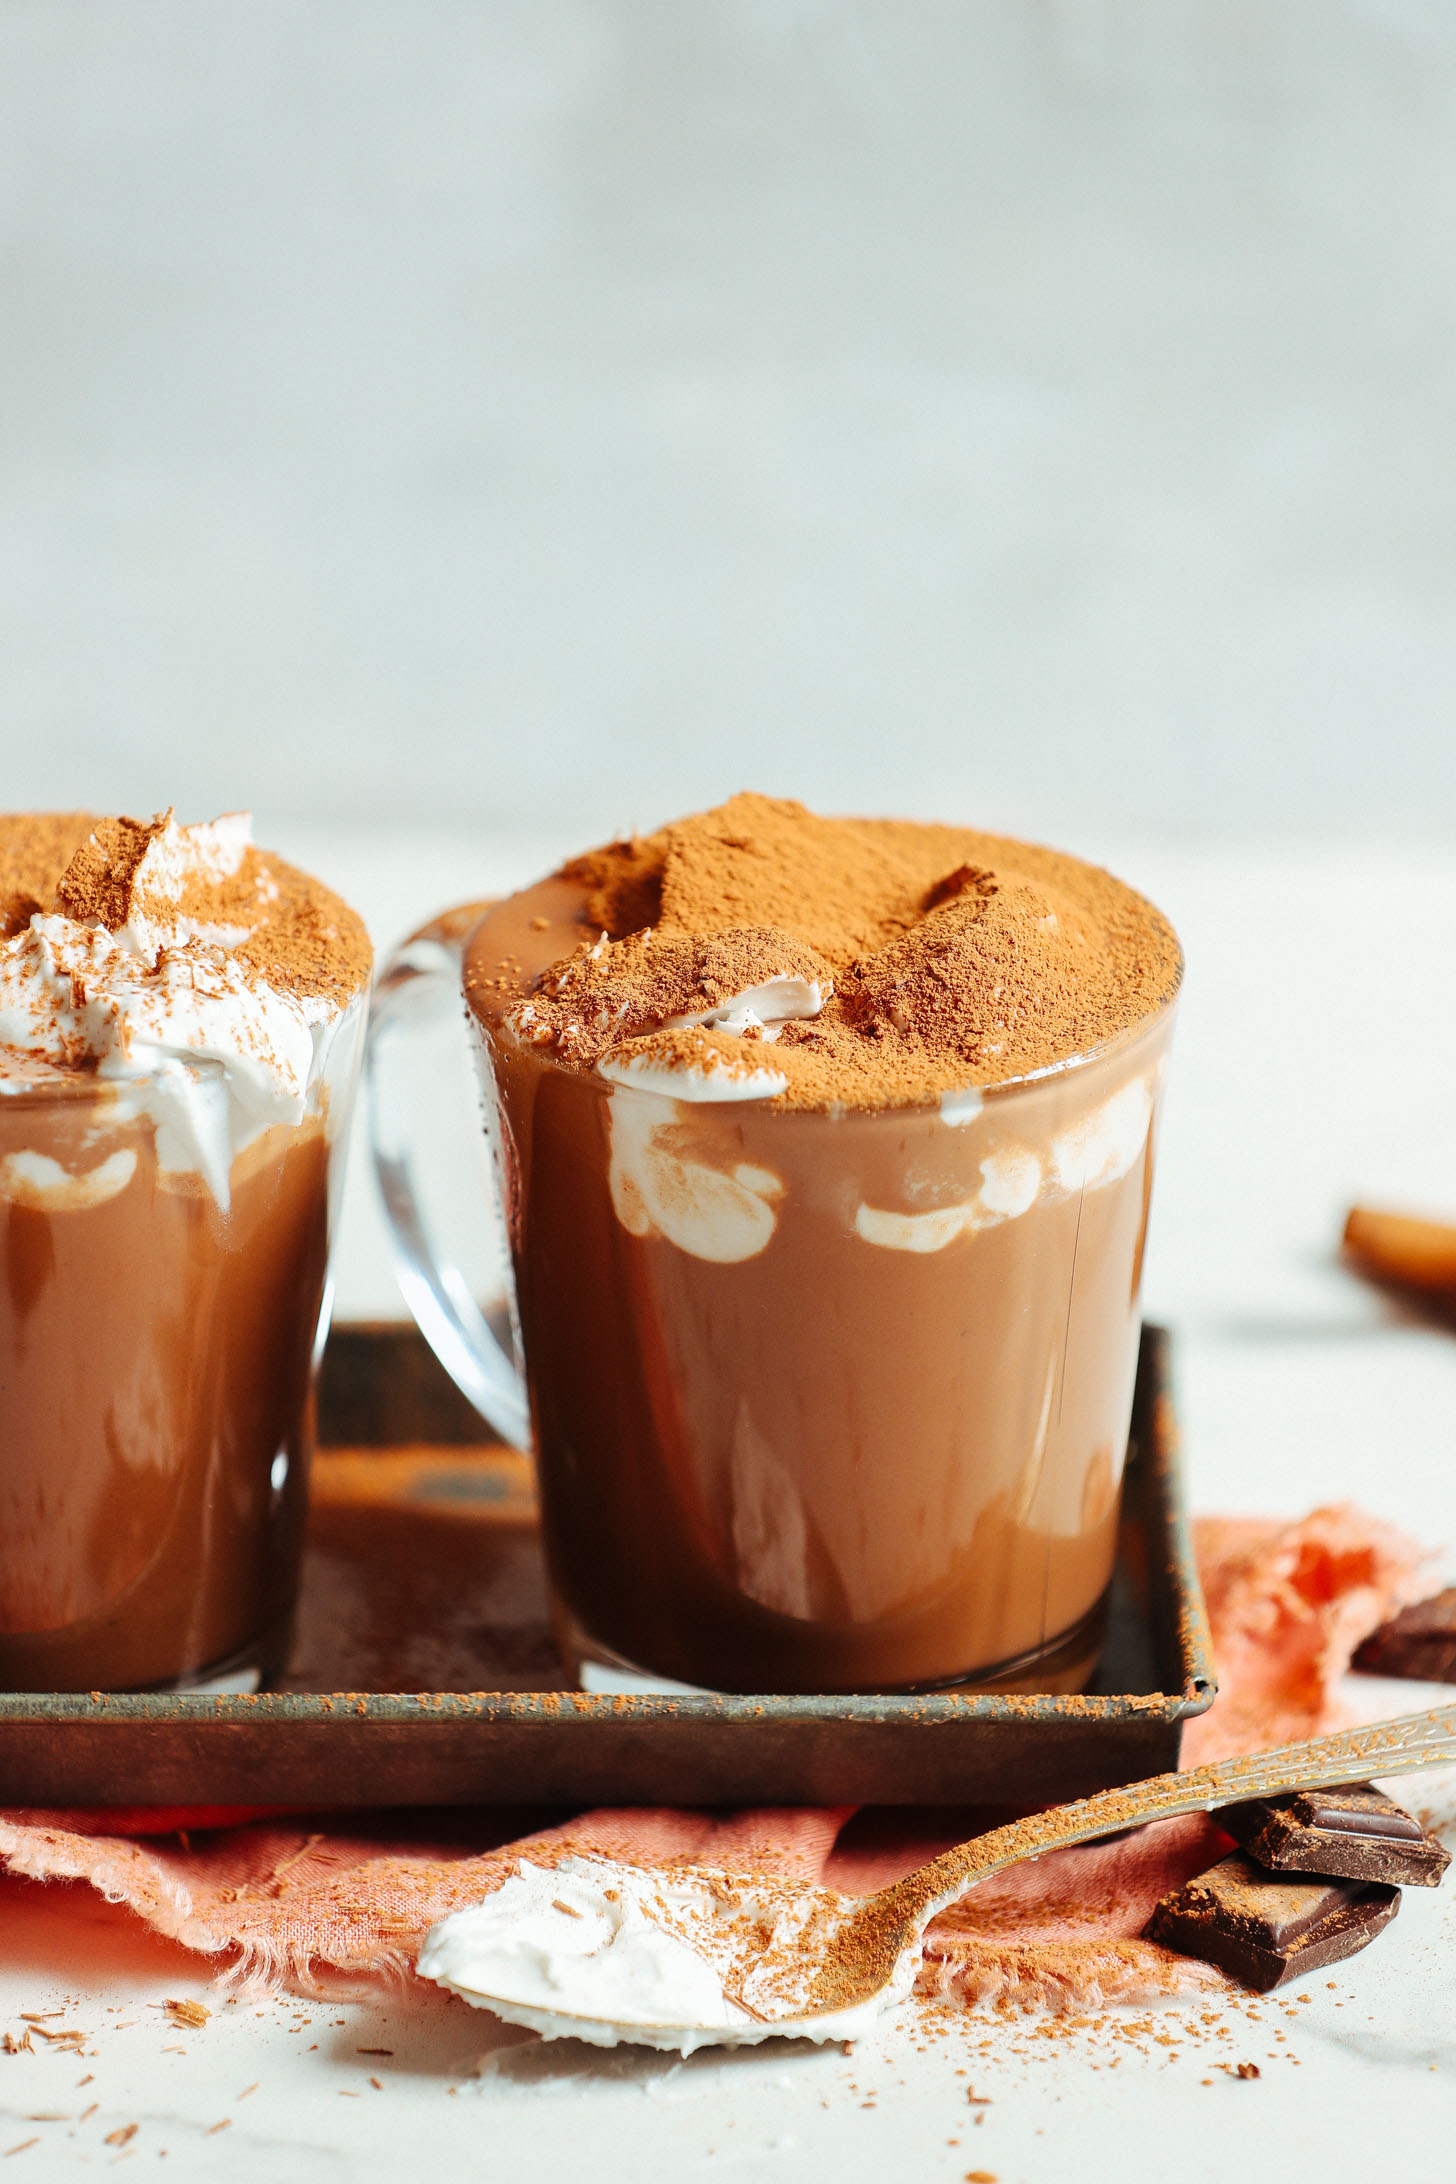 Mugs of Vegan Hot Chocolate topped with coconut whipped cream and shaved chocolate